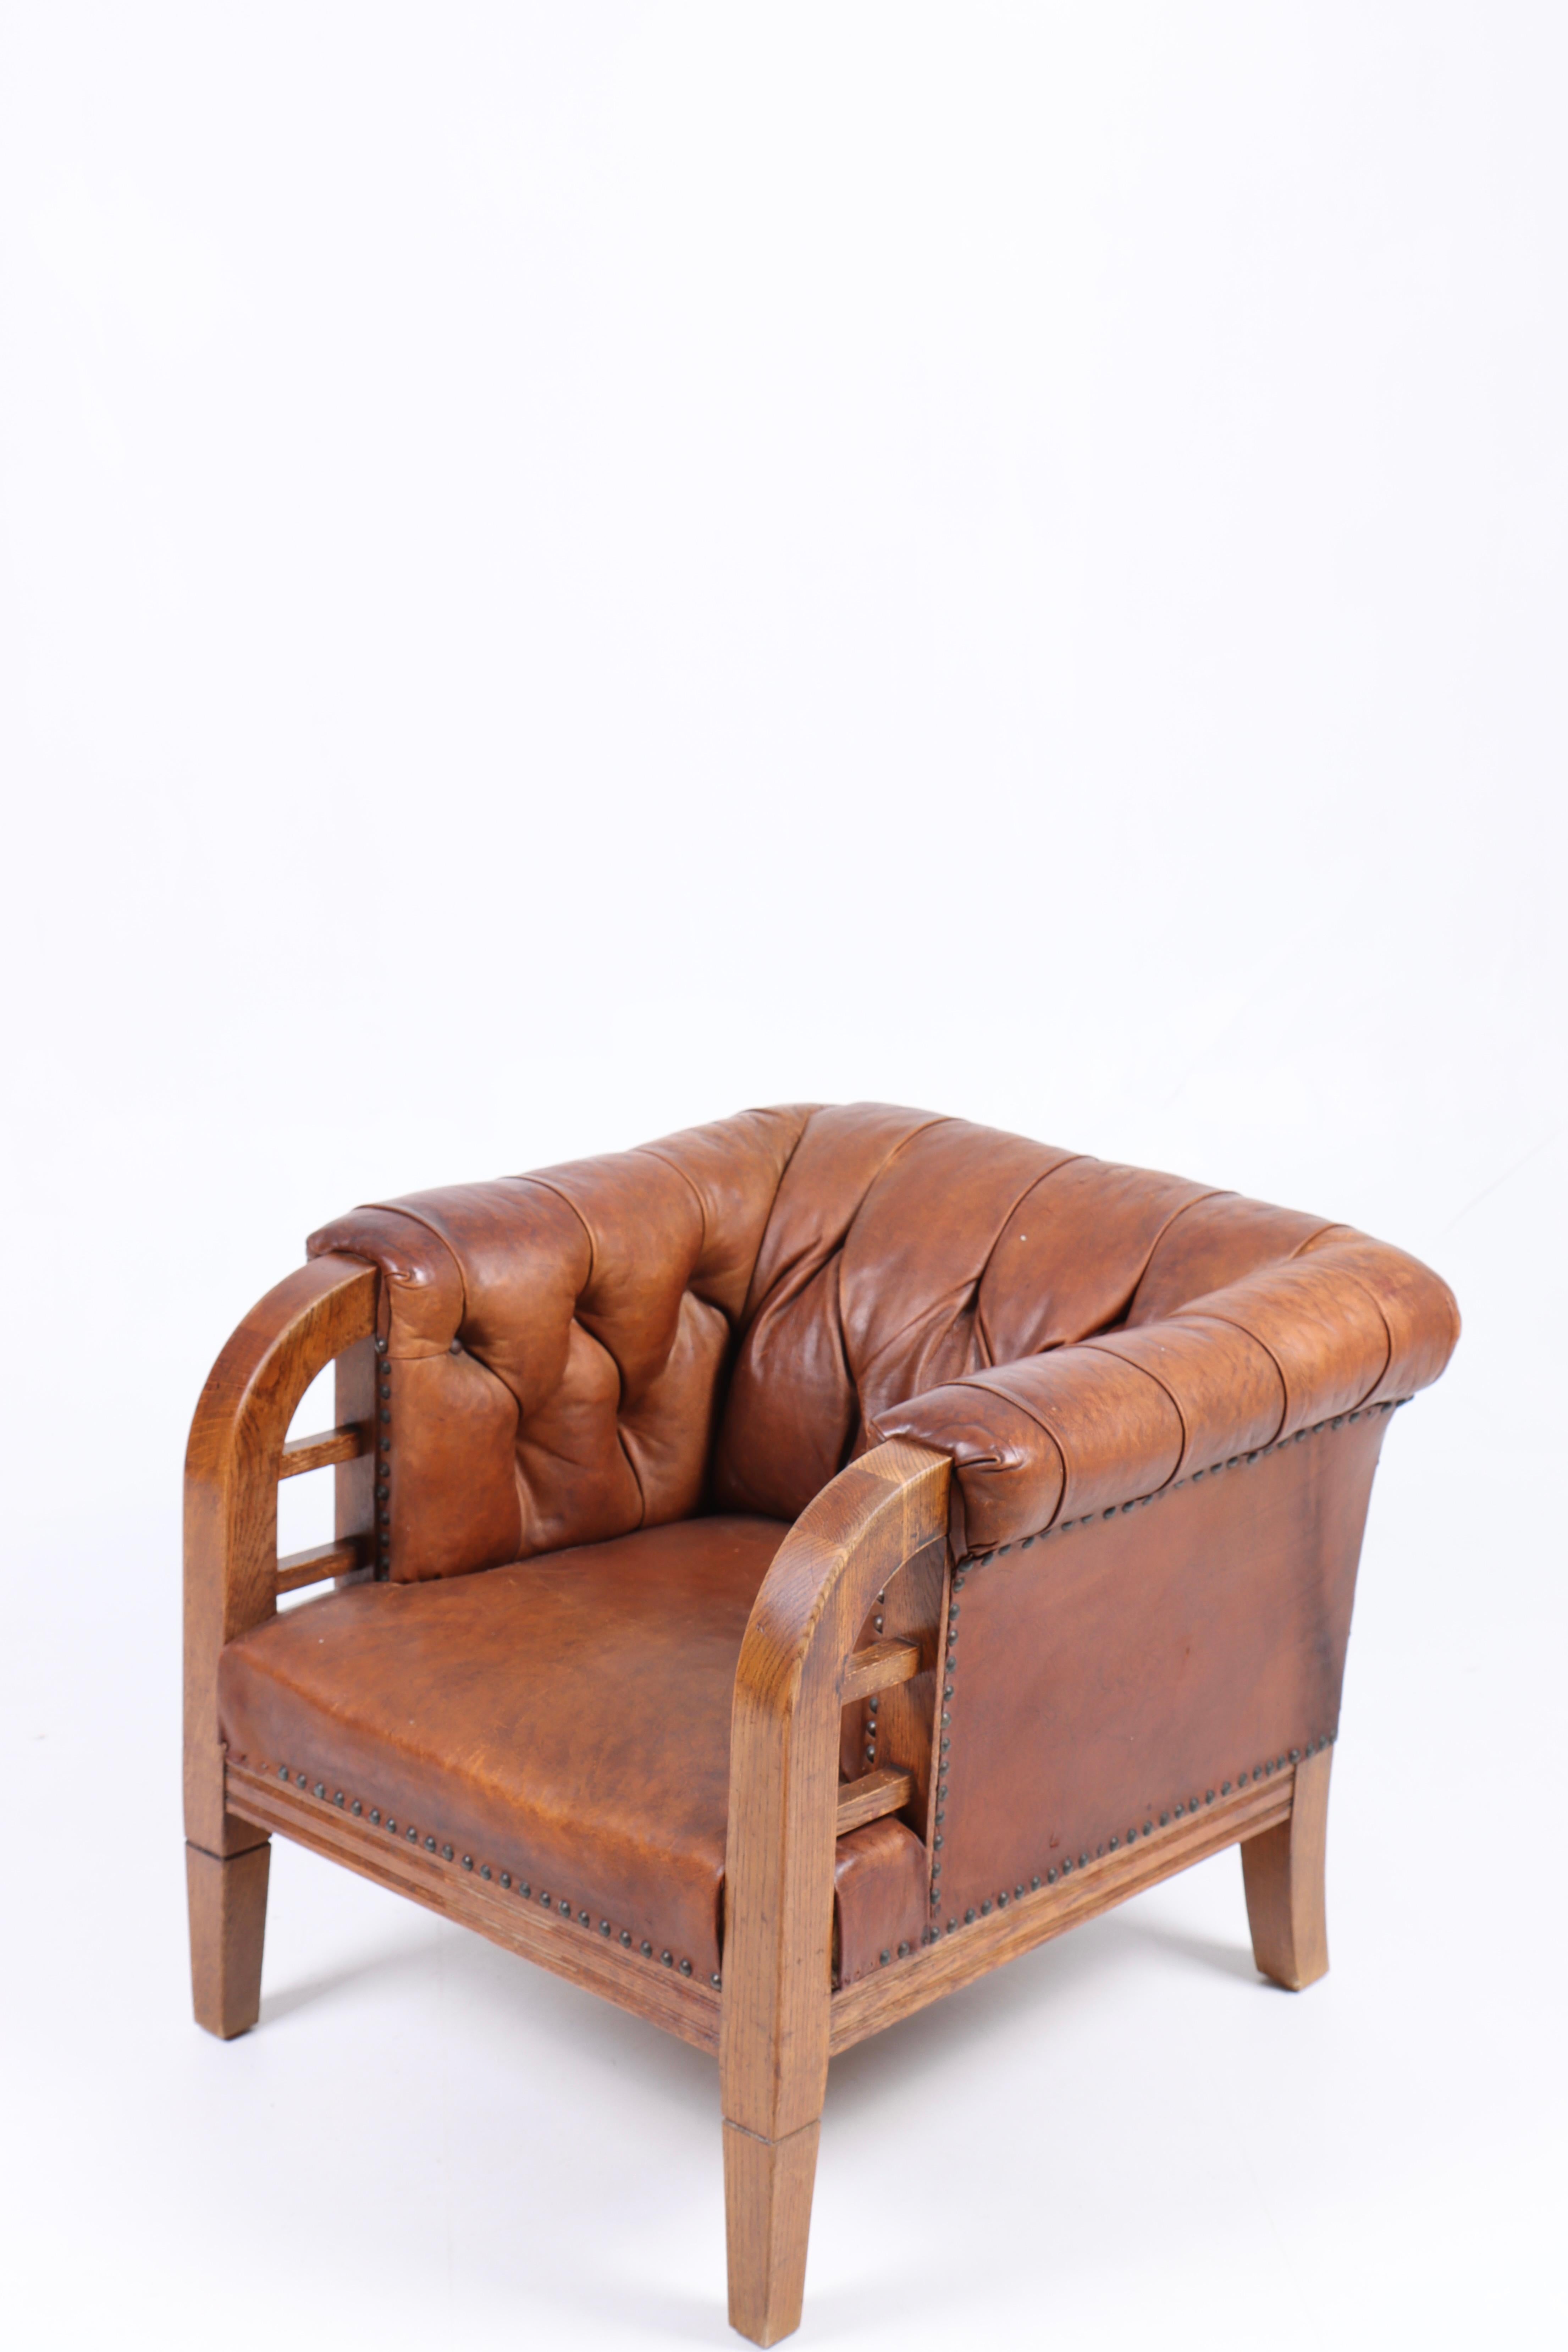 Swedish Lounge Chair in Patinated Leather, Made in Denmark, 1940s For Sale